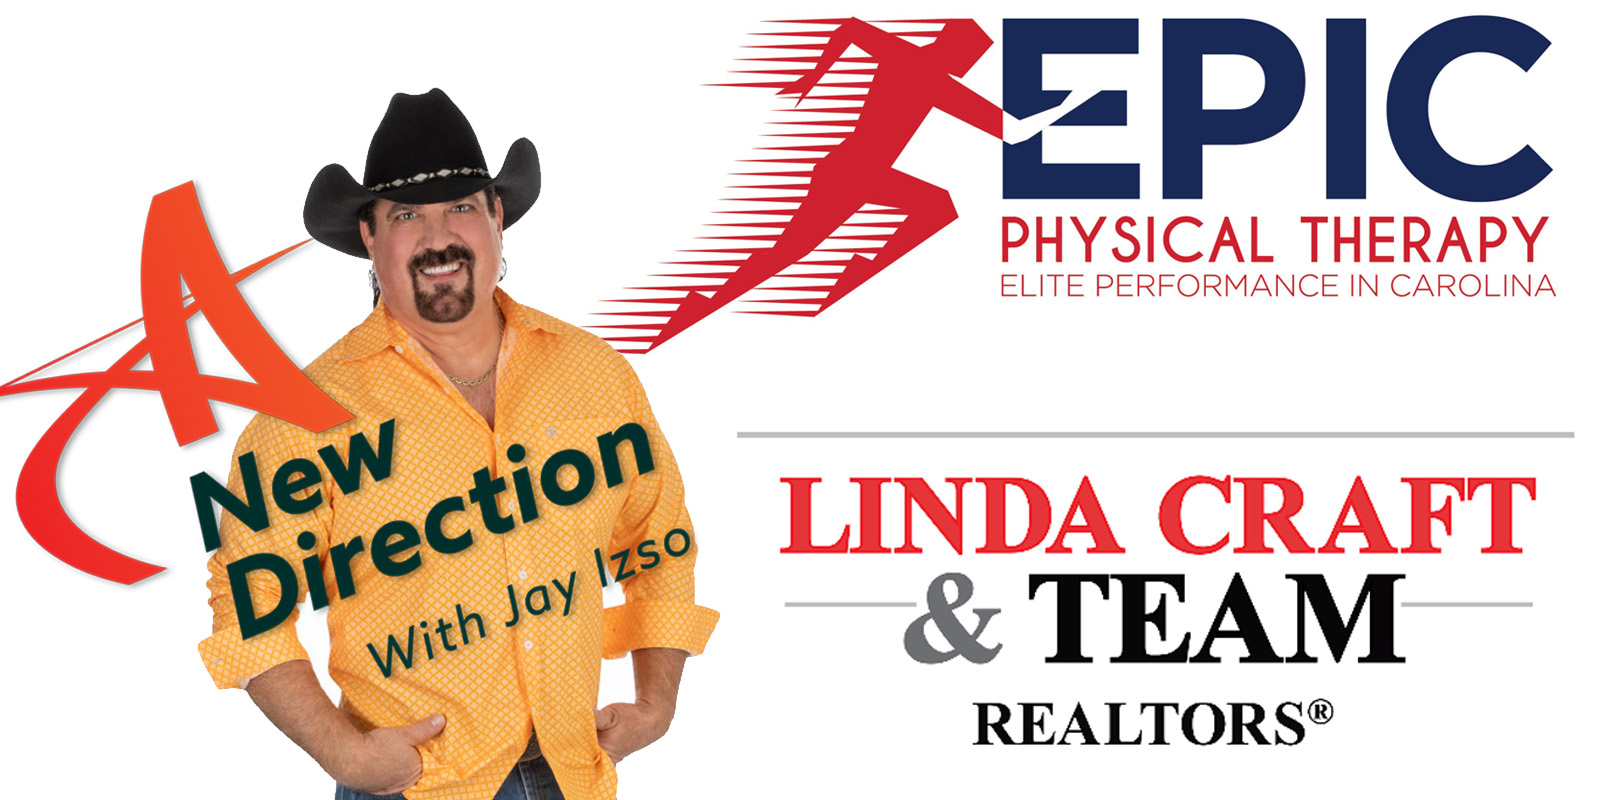 A New Direction Sponsors EPIC Physical Therapy and Linda Craft and Team, Realtors